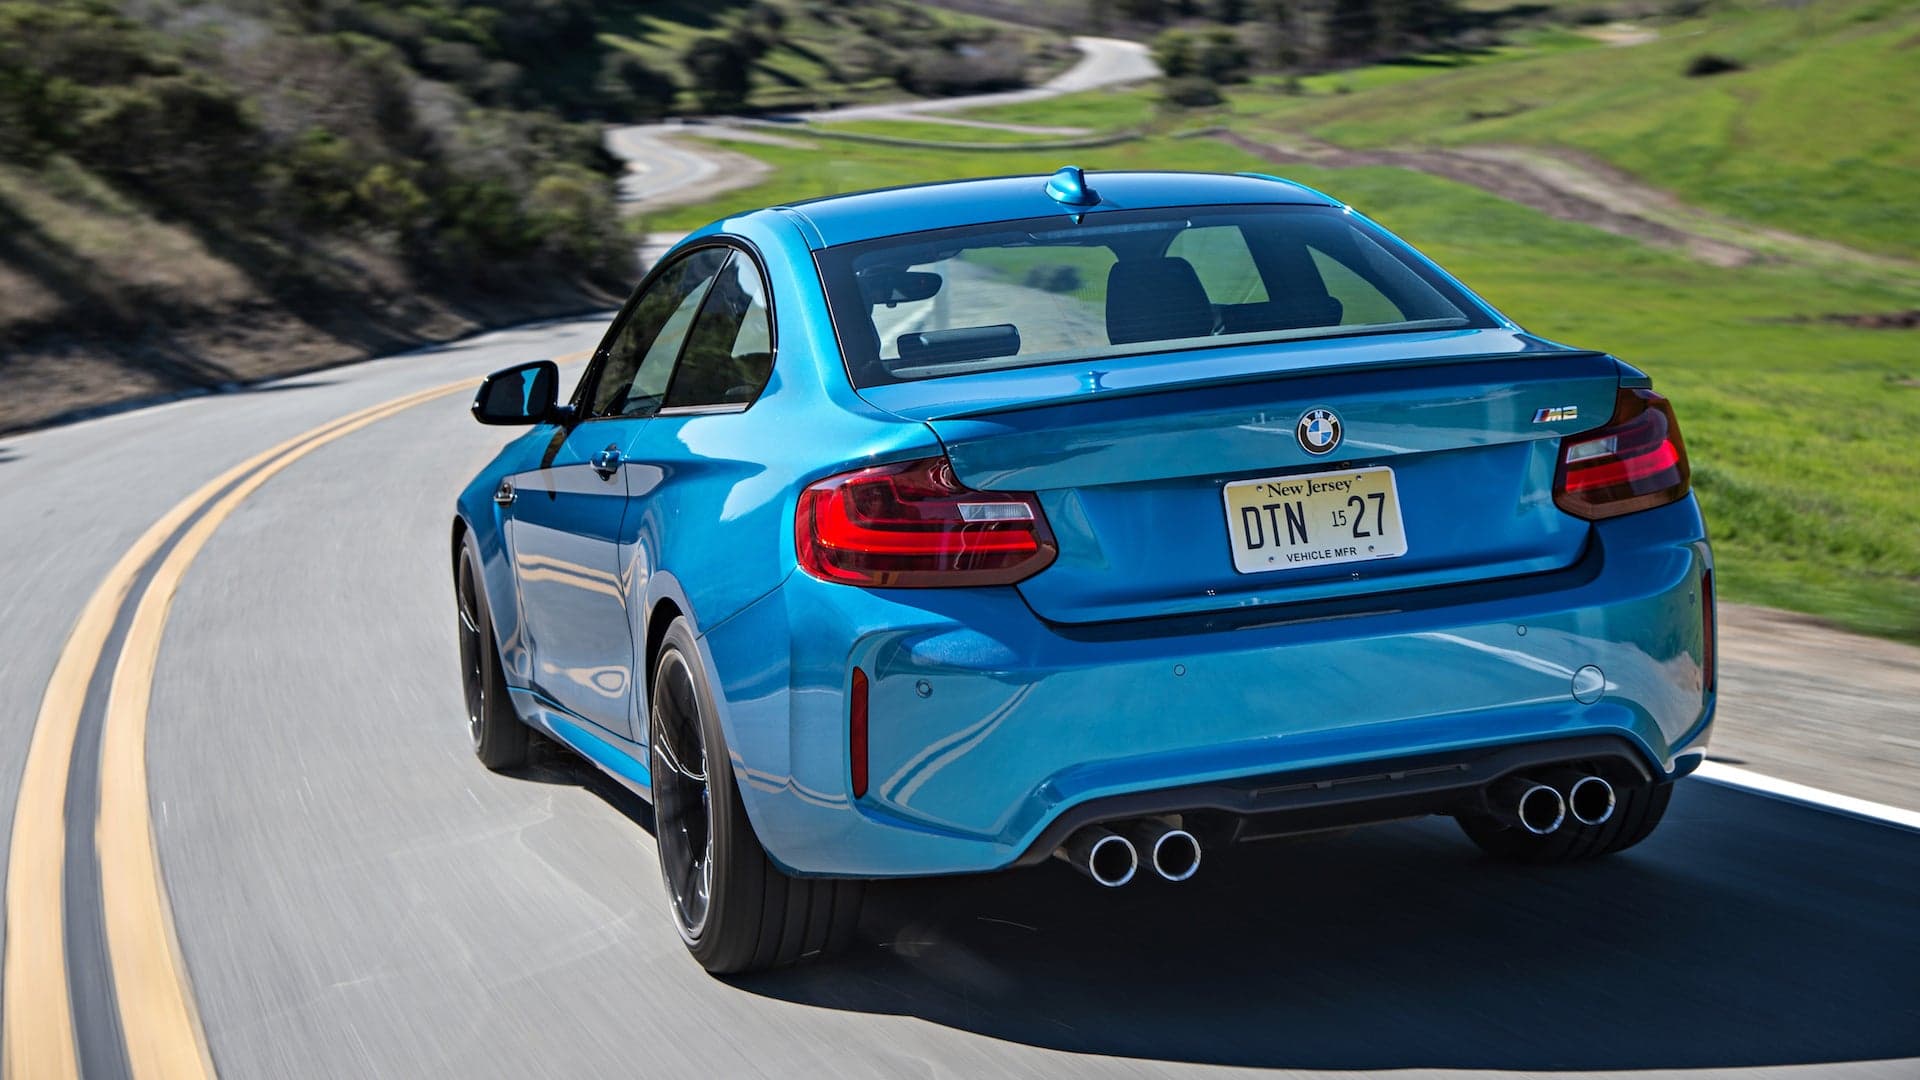 UPDATE: BMW Confirms New Special Edition BMW M2 Is Coming to America